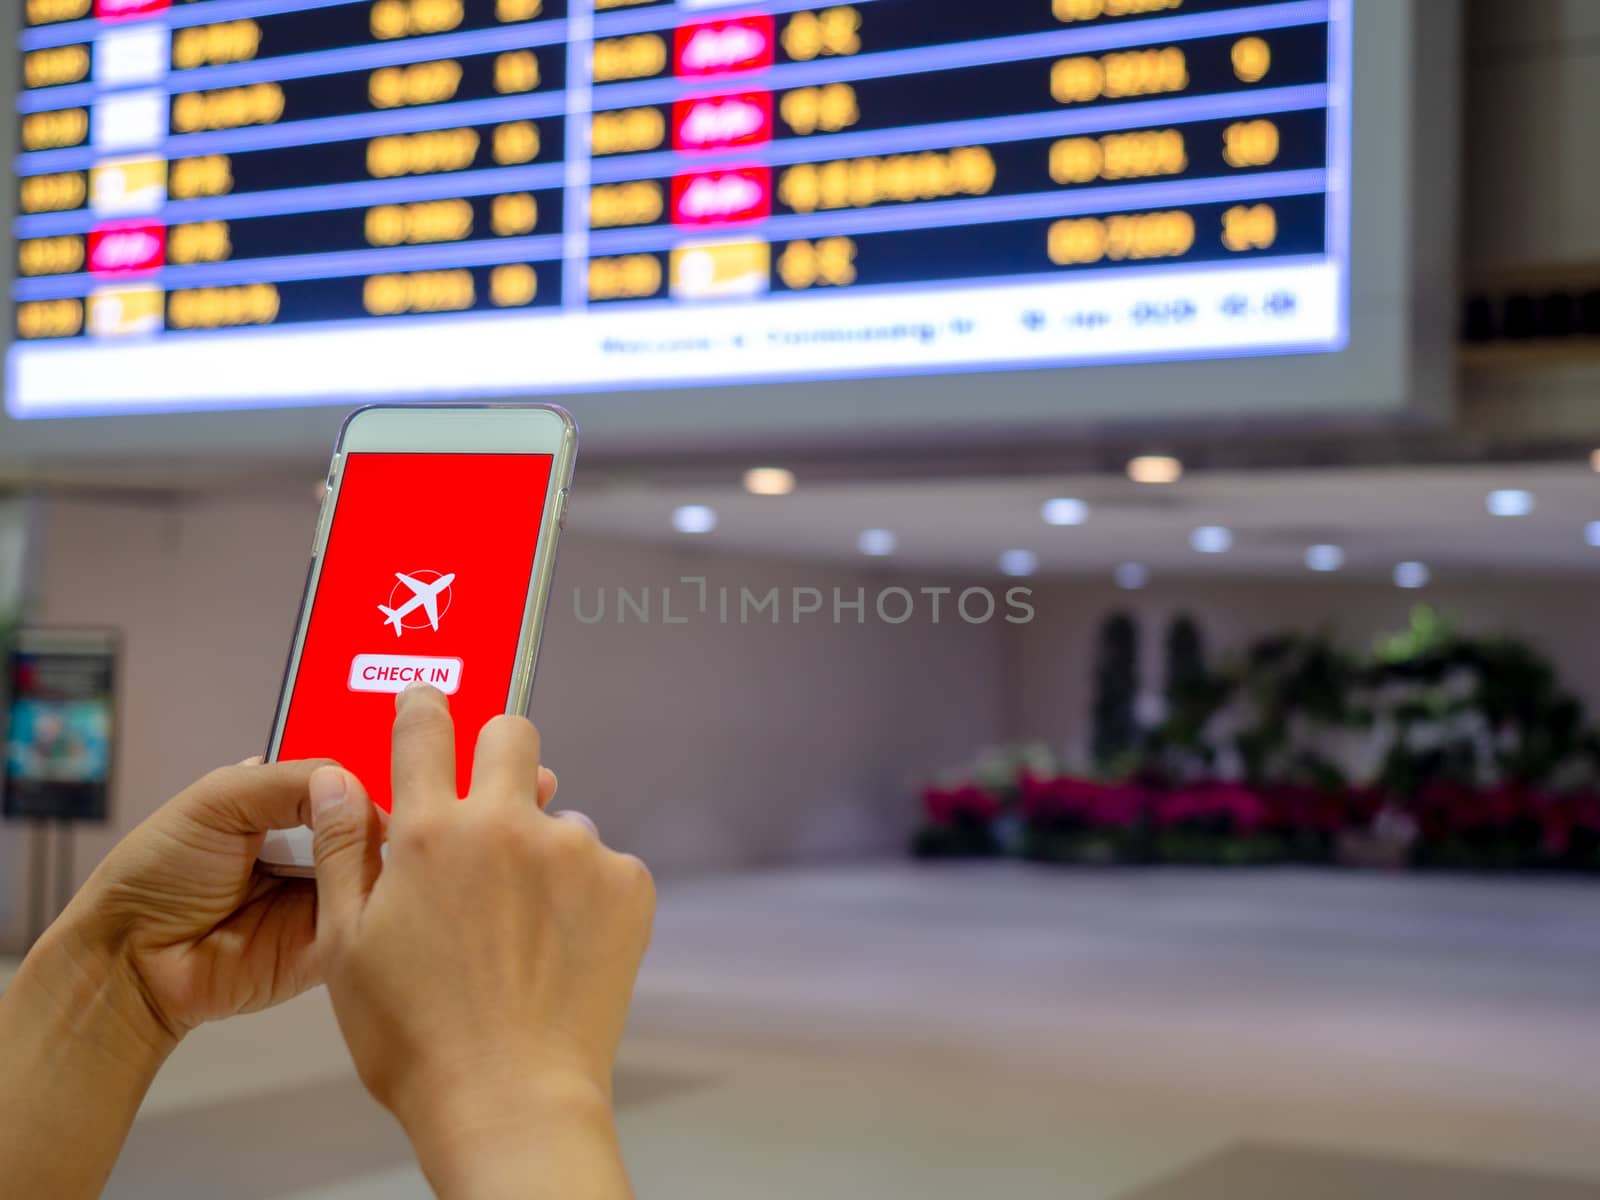 Flight check-in by mobile phone. Hand touching on smartphone screen to check-in for a flight in terminal airport.